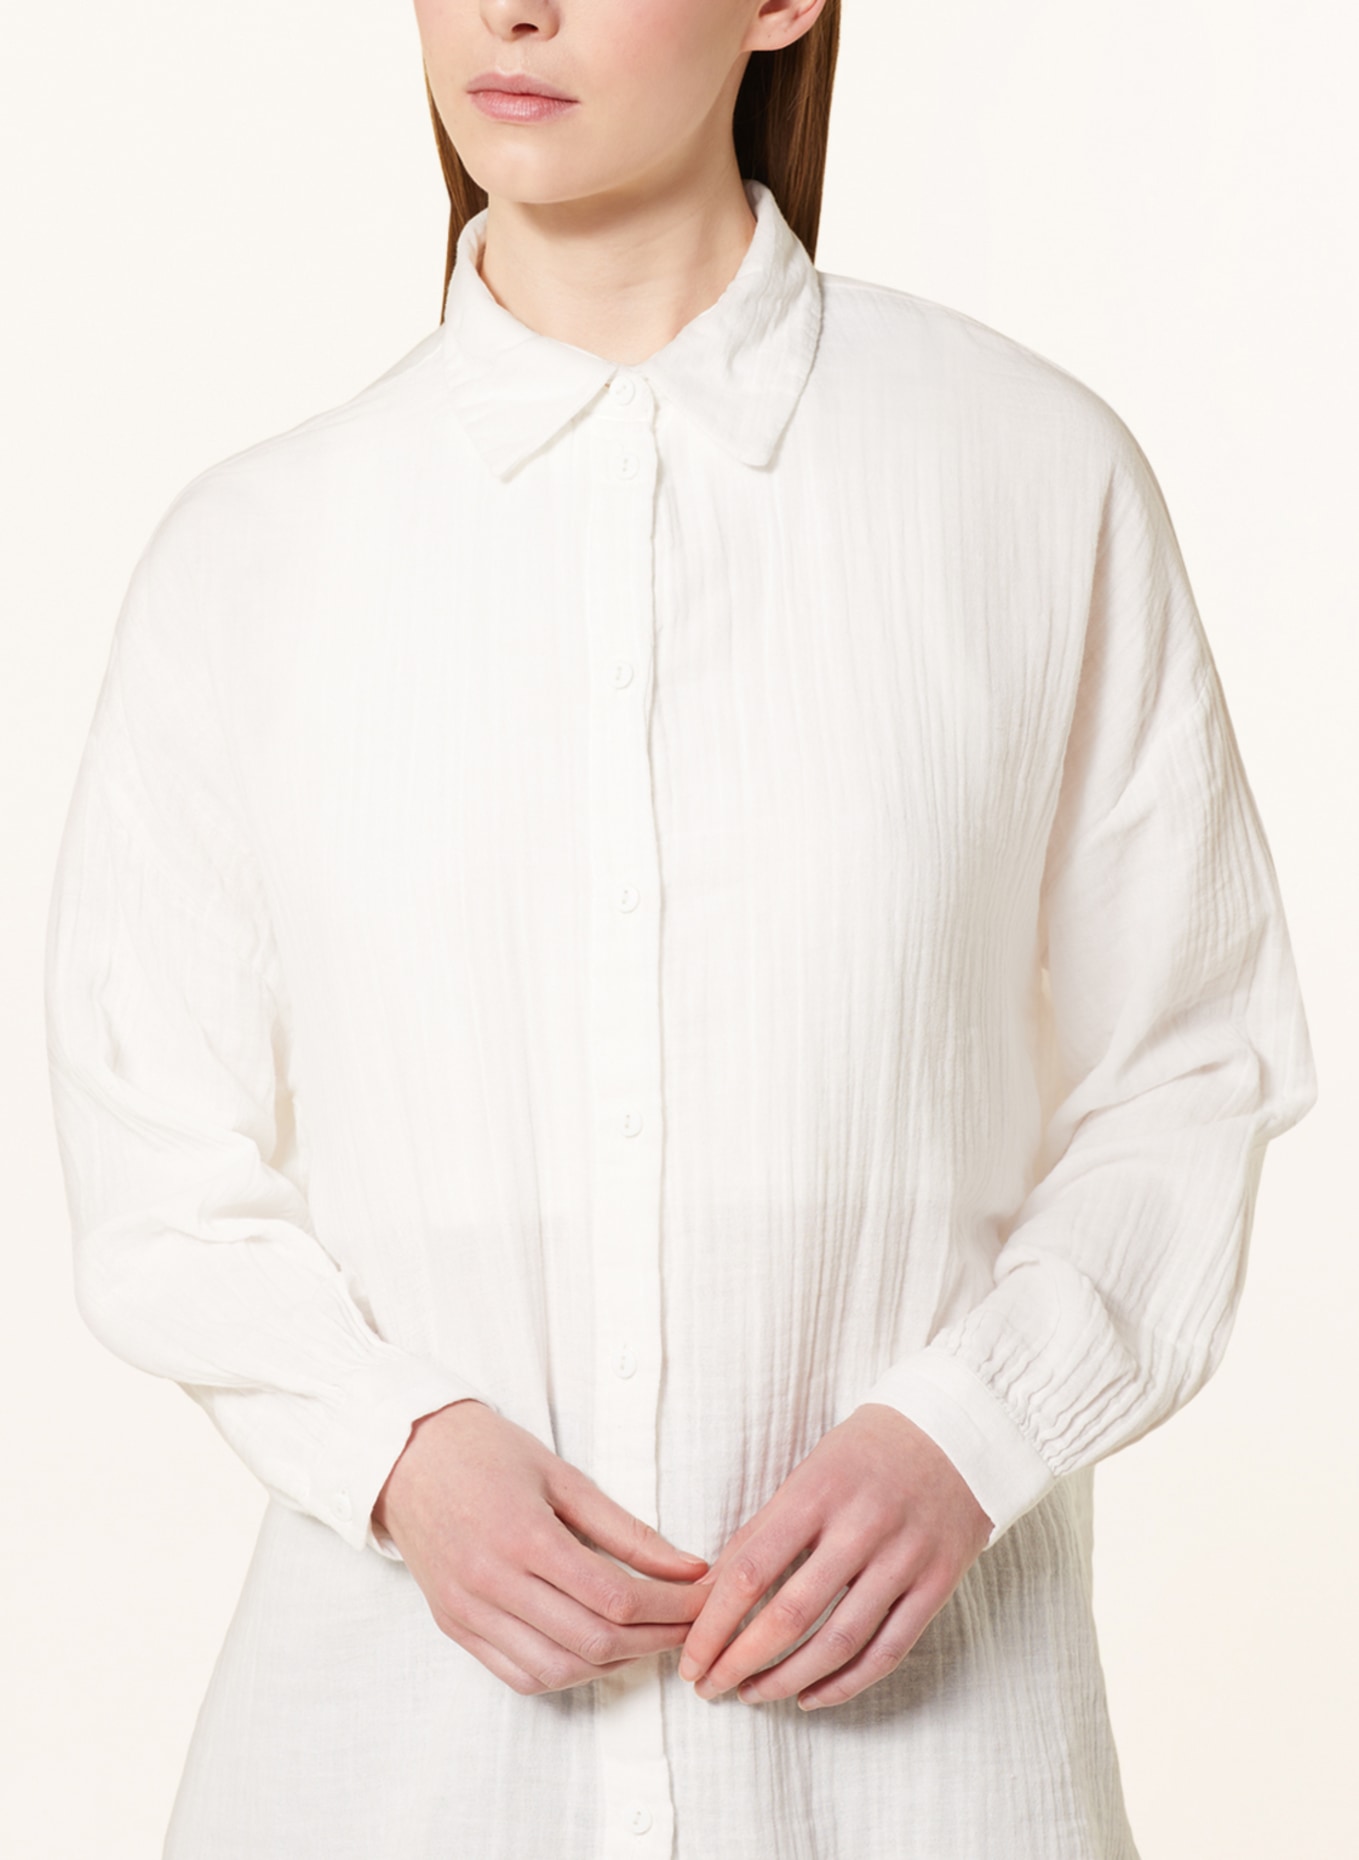 ONLY Oversized shirt blouse, Color: WHITE (Image 4)